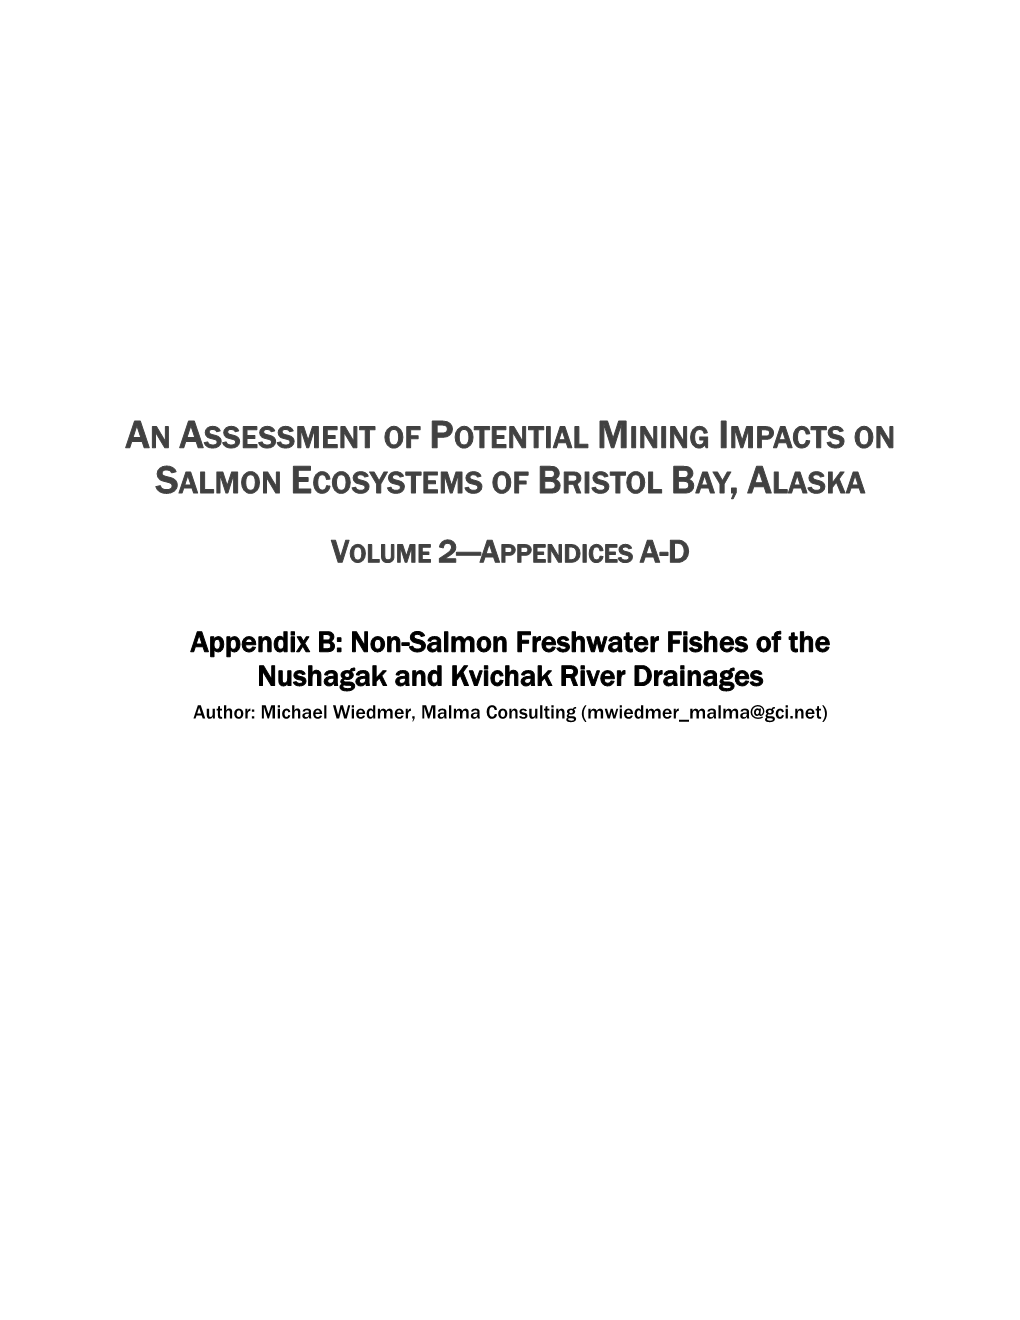 Non-Salmon Freshwater Fishes of the Nushagak And